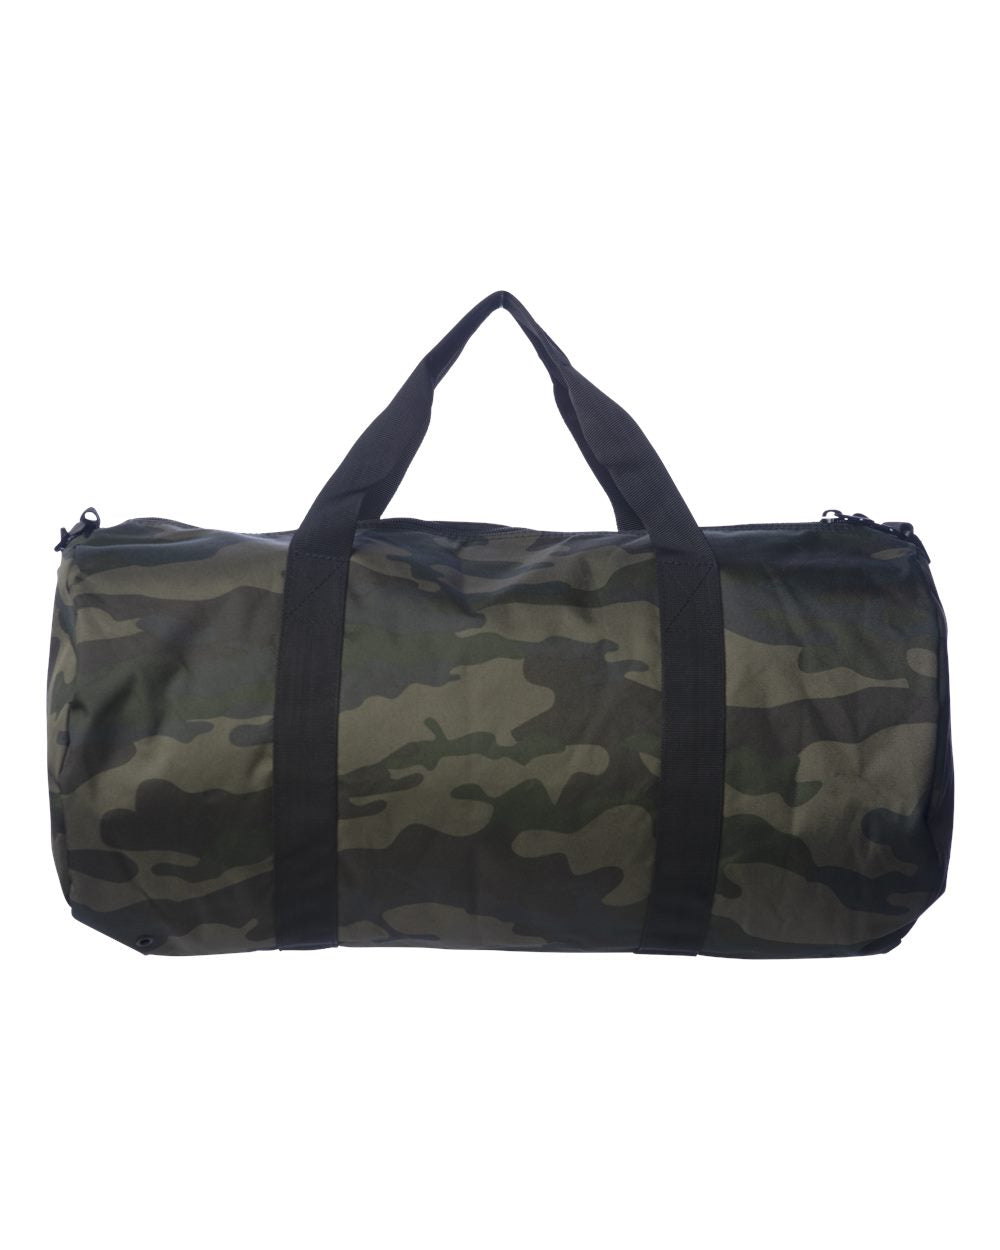 Independent Trading Co. 29L Day Tripper Duffel Bag INDDUFBAG #color_Forest Camo